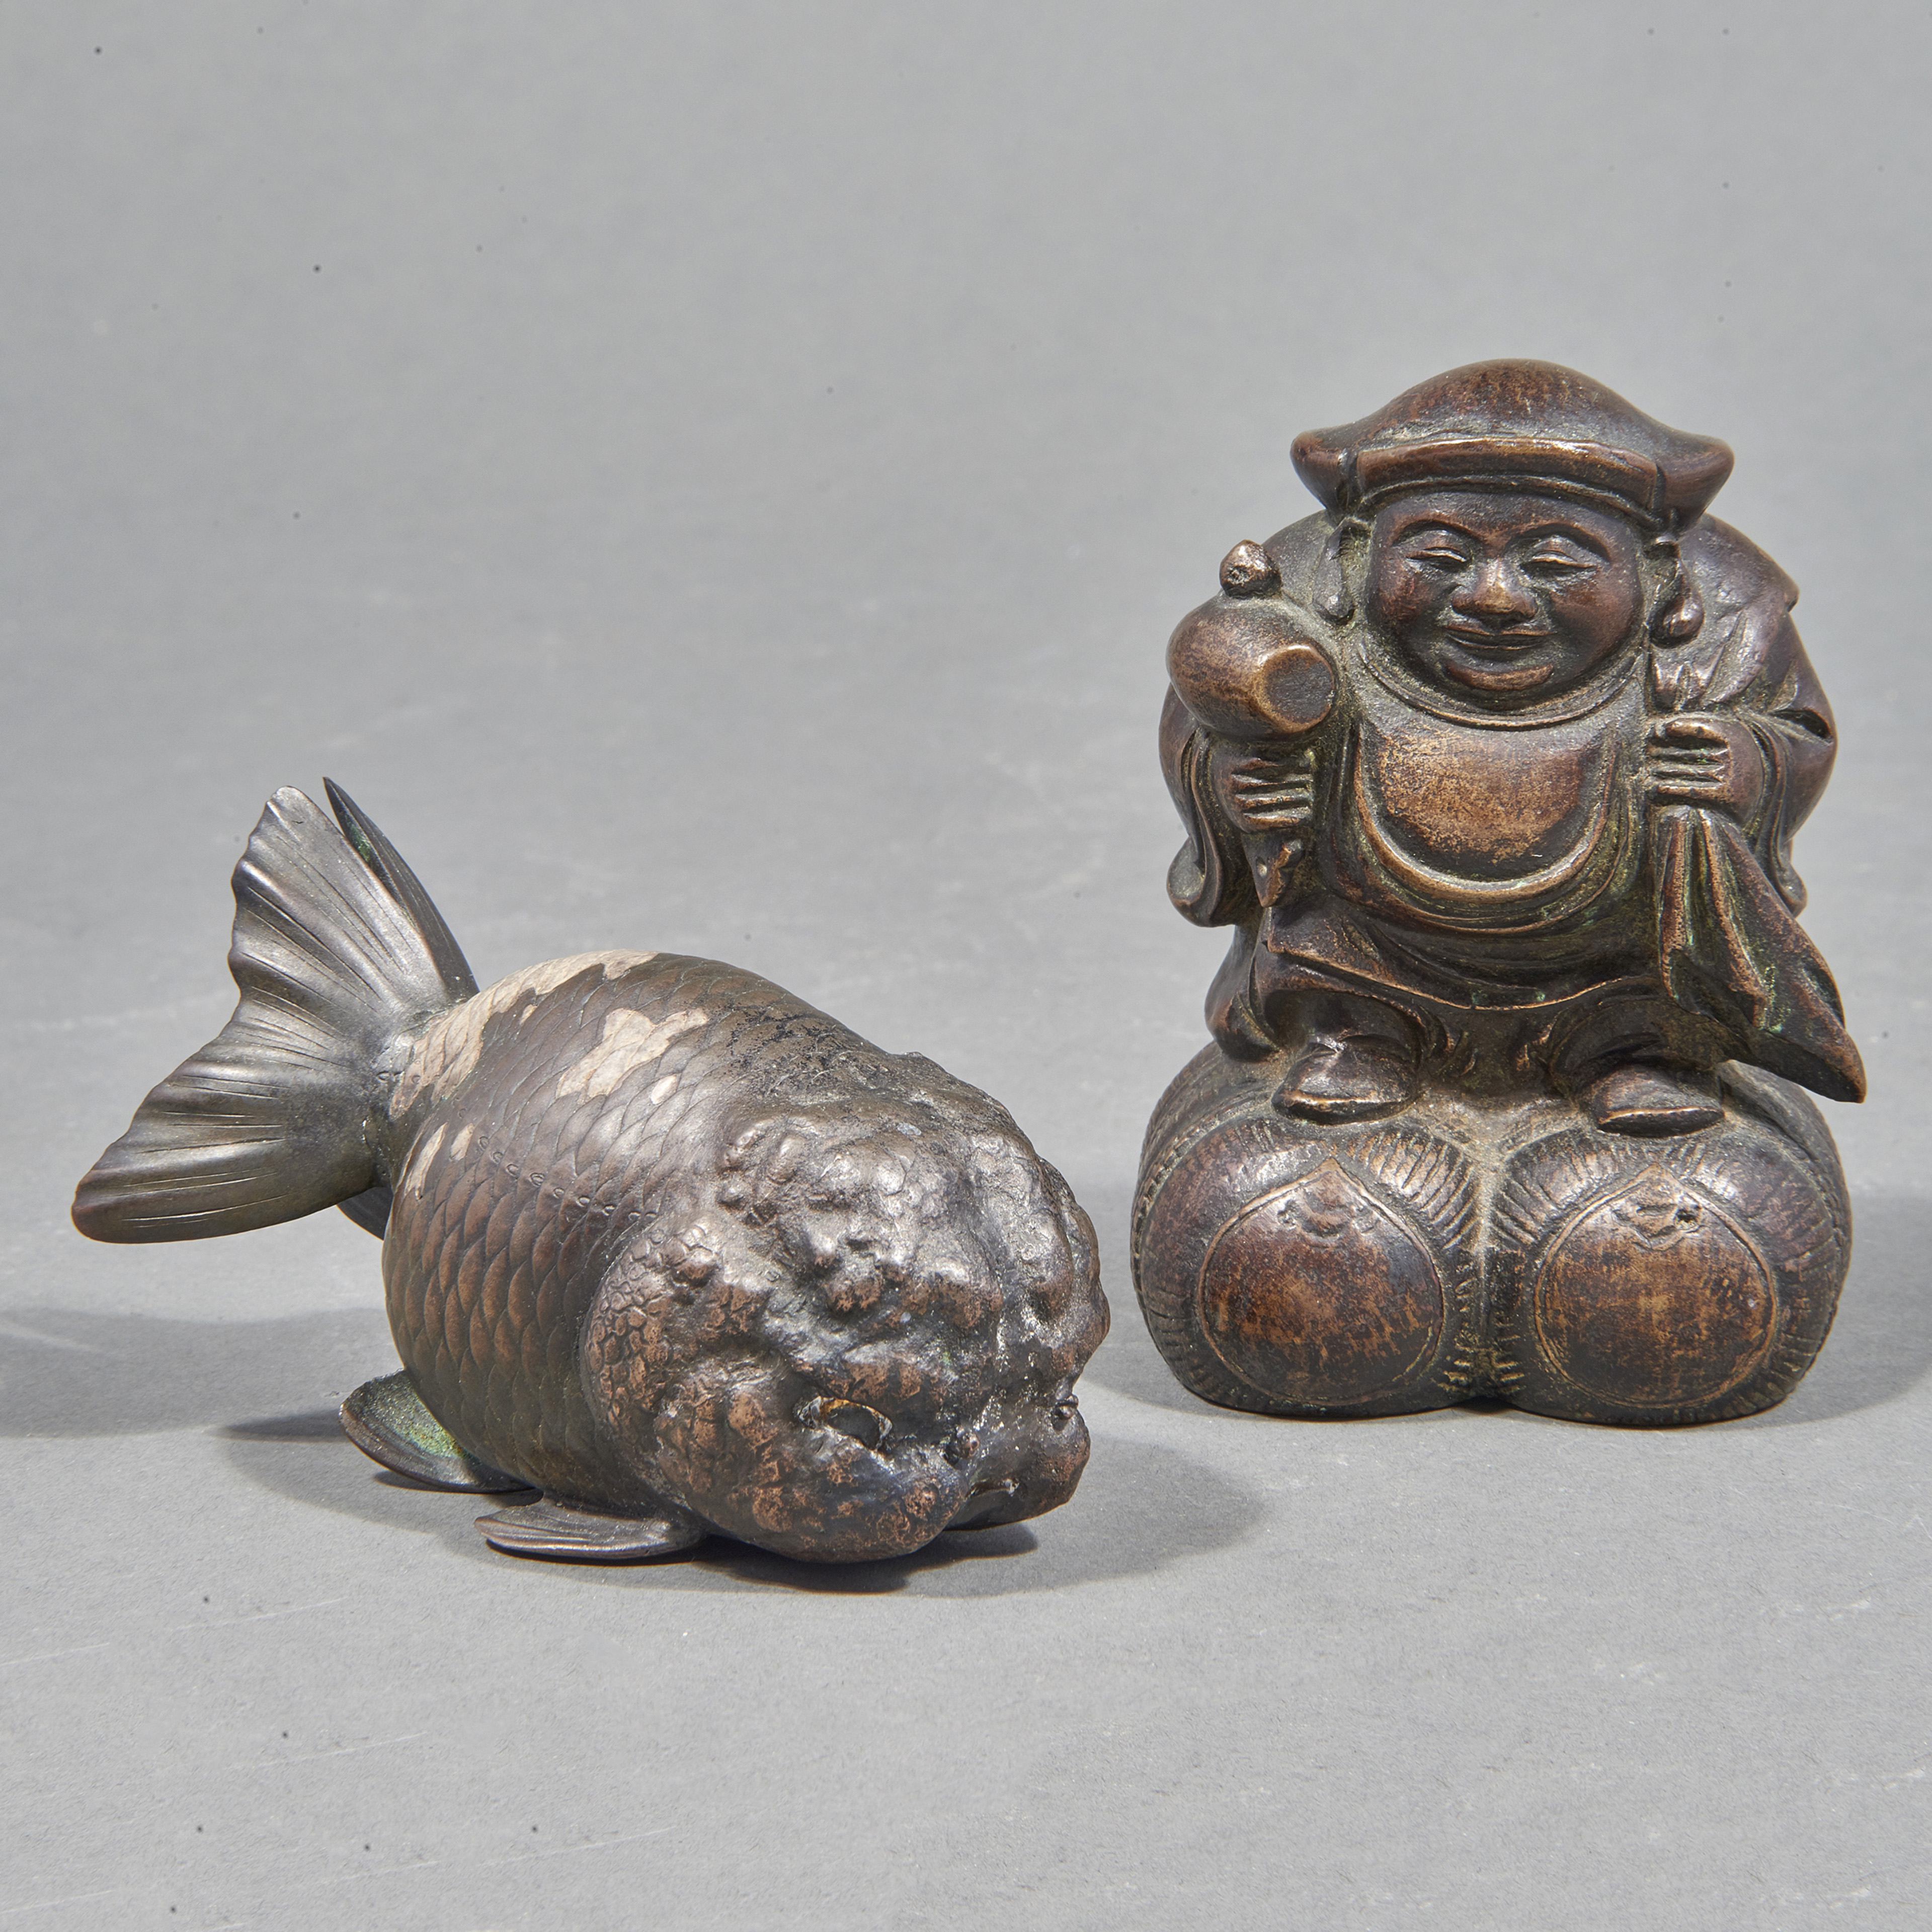  LOT OF 2 JAPANESE BRONZE OBJECTS 3a6329